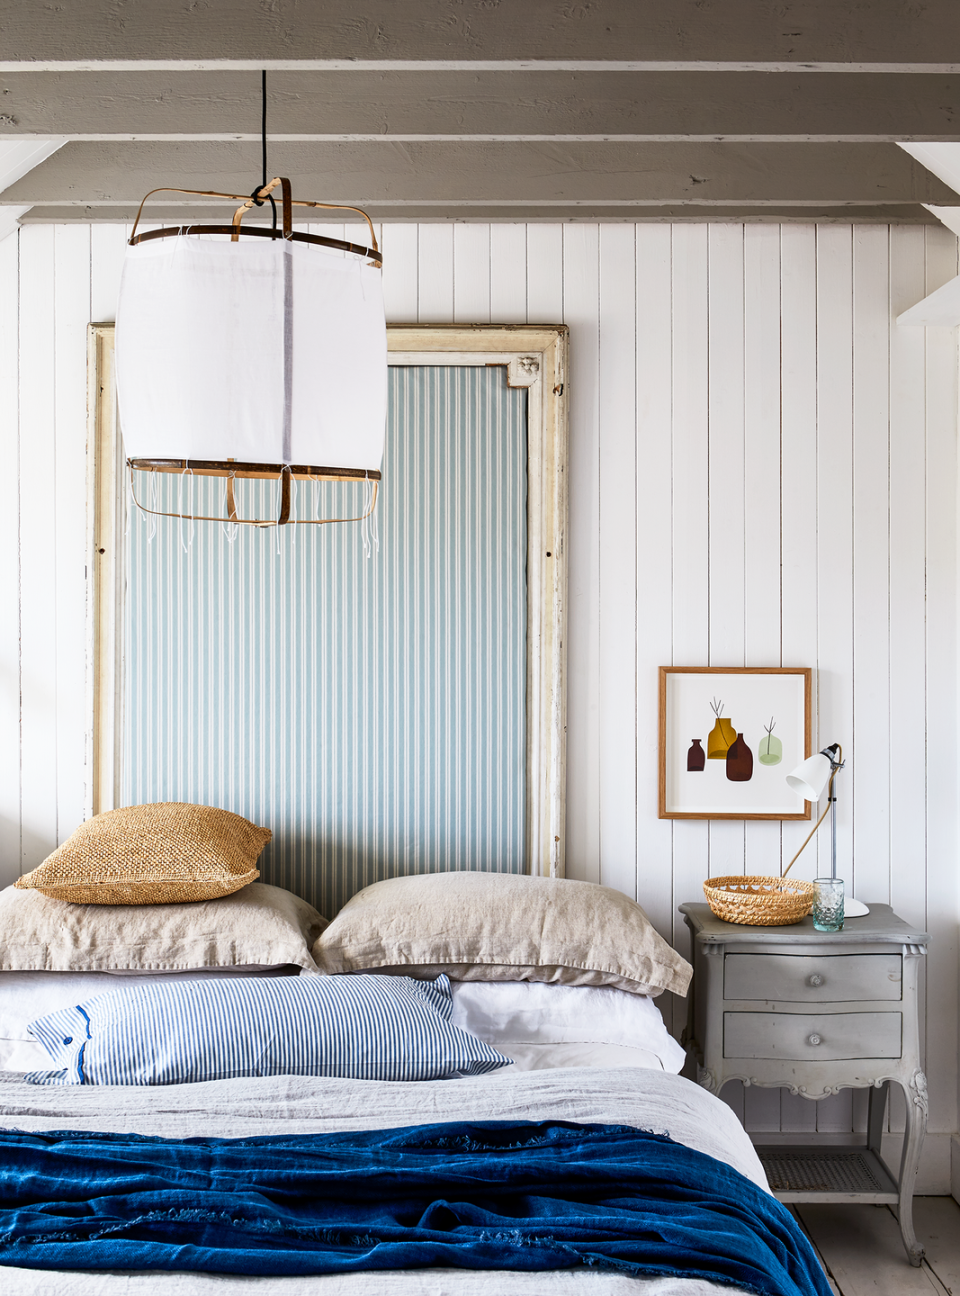 Coastal-inspired bedroom with a DIY headboard made from an antique mirror frame and striped upholstery for a nautical feel